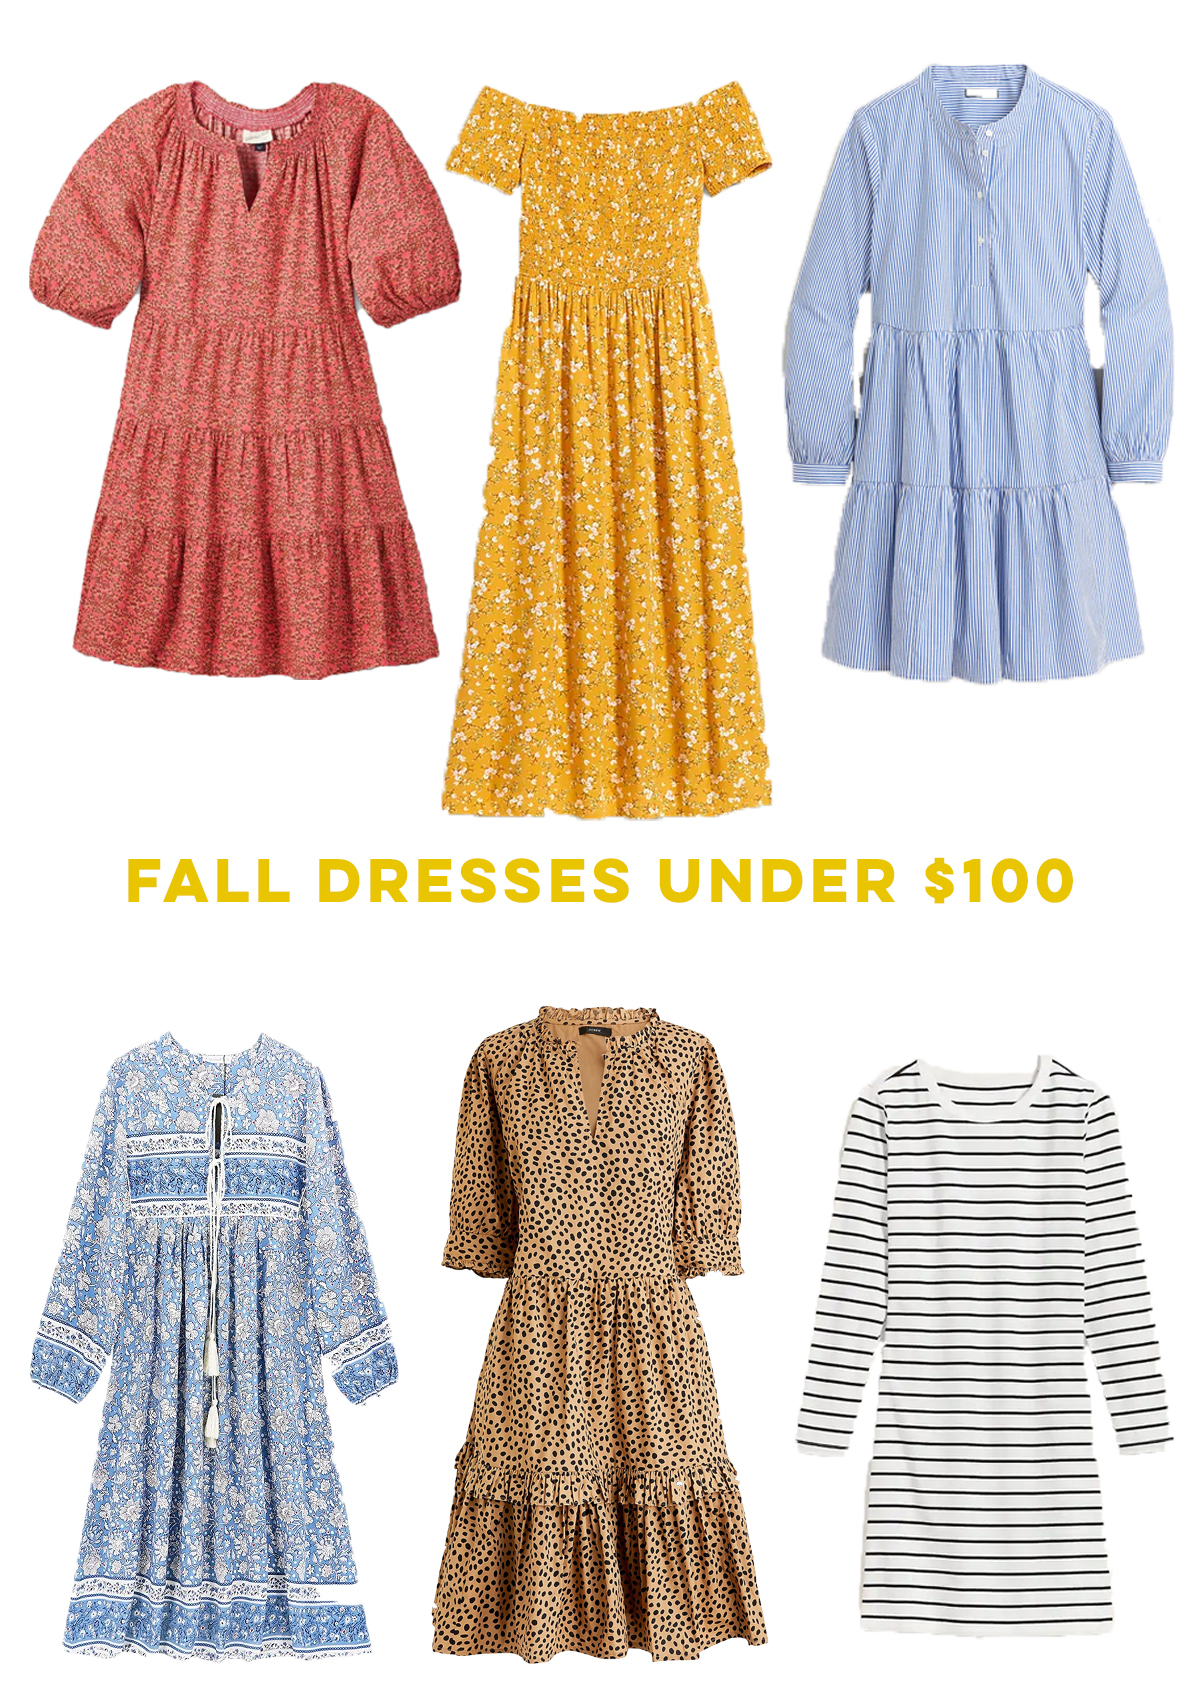 Affordable Fall Dresses Under $100 / Babydoll Dress / Tiered Dress / Ruched Dress / Striped Dress / Long Sleeve Dress / Leopard Print Dress / Floral Dress - Sunshine Style, A Preppy Fashion and Coastal Lifestyle Blog by Katie